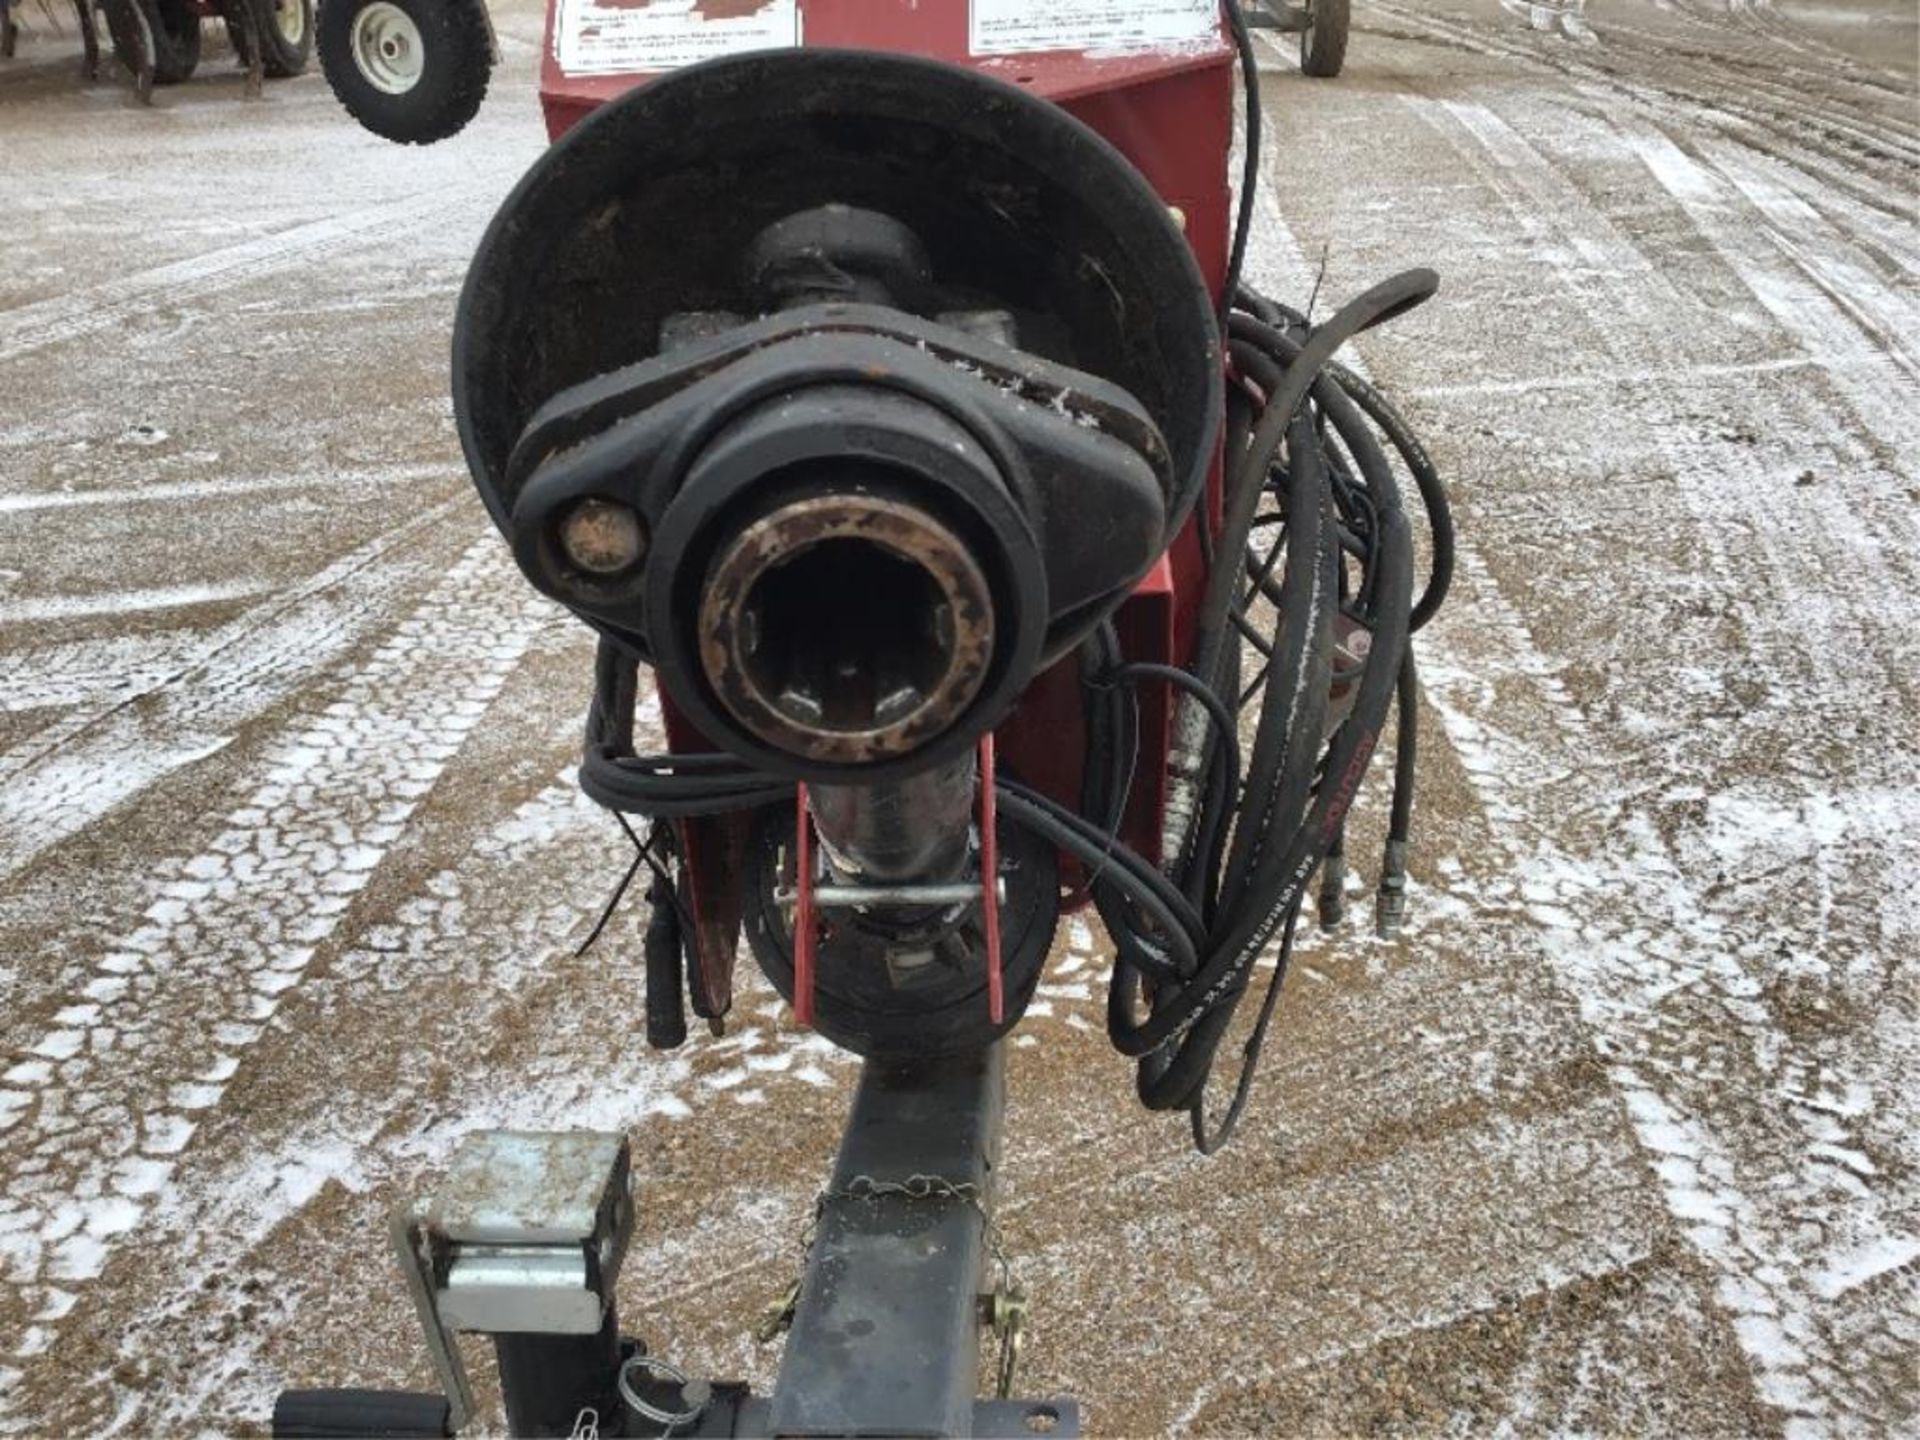 88 Meridian SLMD10-72 10in x 72Ft Swing Out Auger 540PTO, Remote Kramble Hyd Drive & Lift on Swing - Image 3 of 12